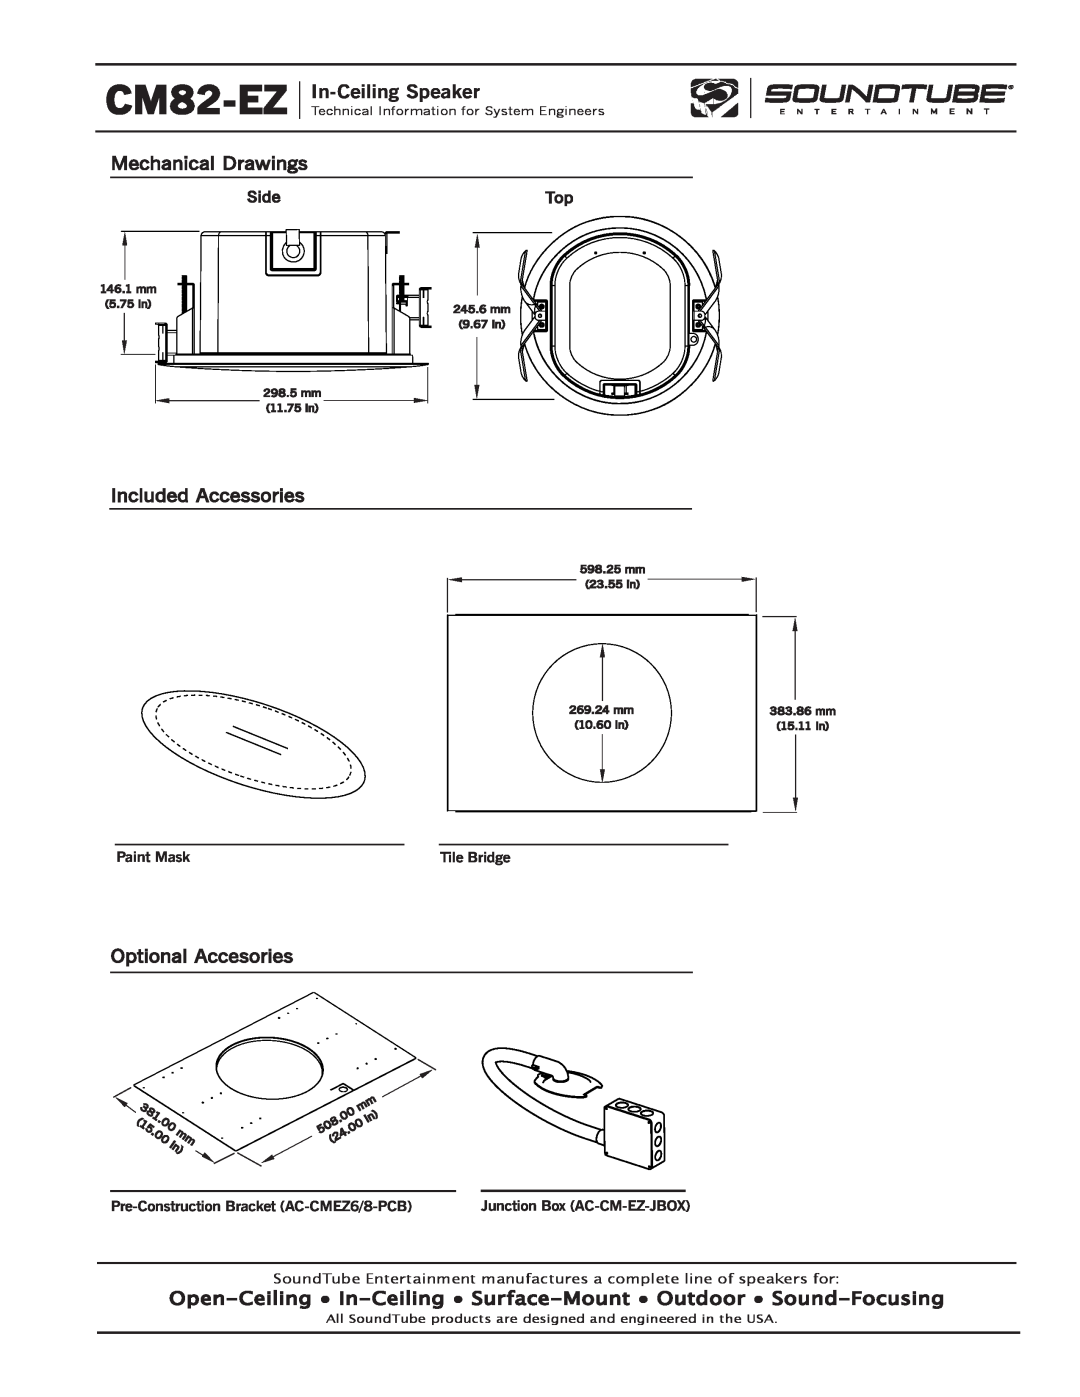 Phase Technology CM82-EZ Mechanical Drawings, Included Accessories, Optional Accesories, In-CeilingSpeaker, Paint Mask 